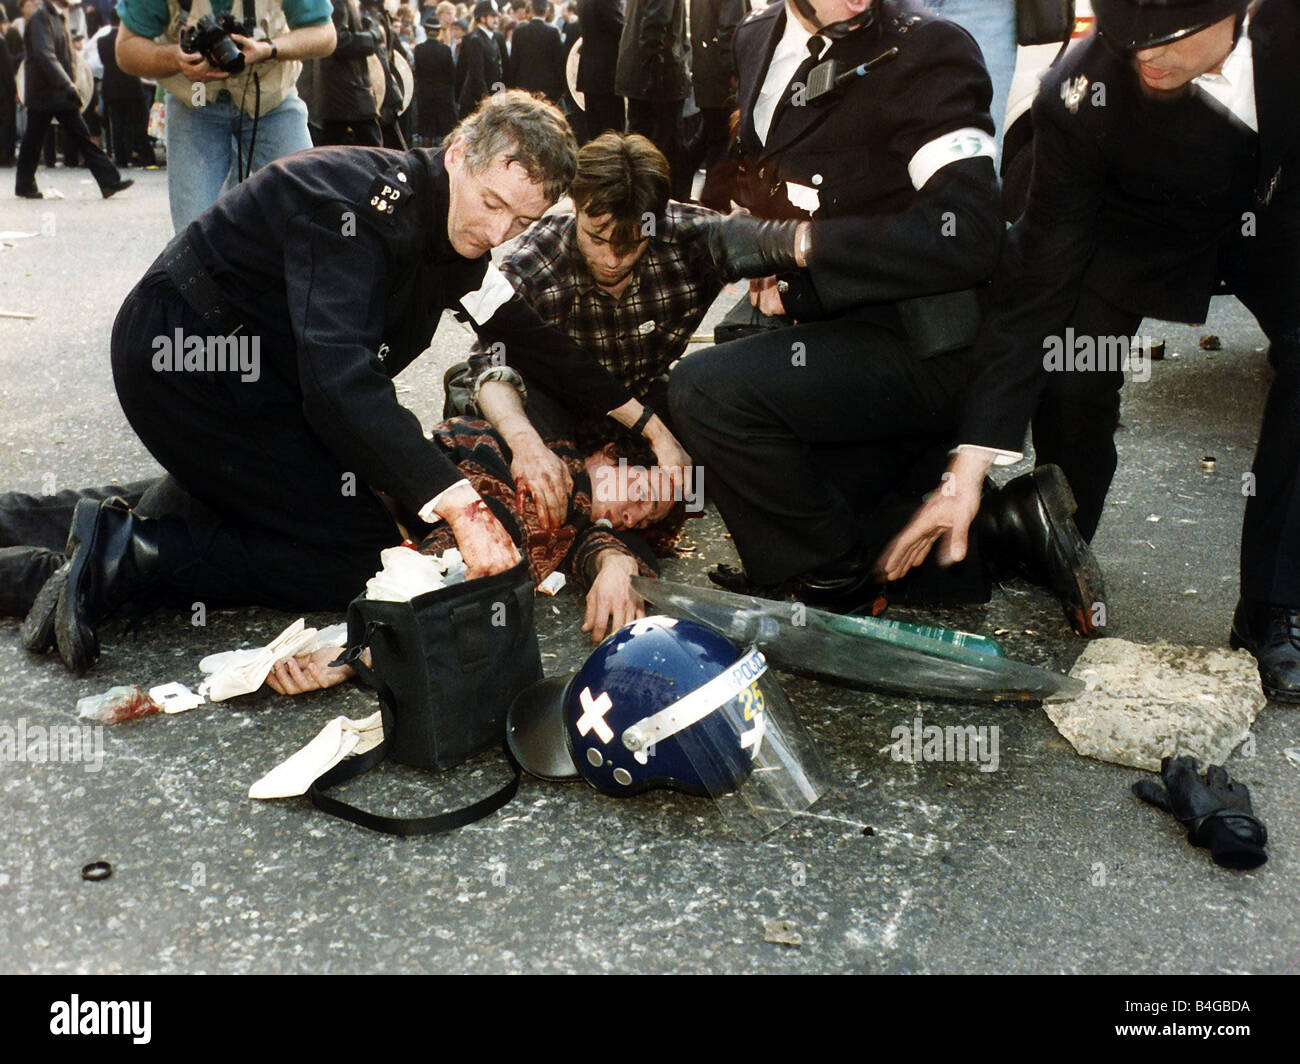 Demonstrations Poll Tax Riots March 1990 A man lies on the ground with a bleeding head wound being attended to by the police in Stock Photo